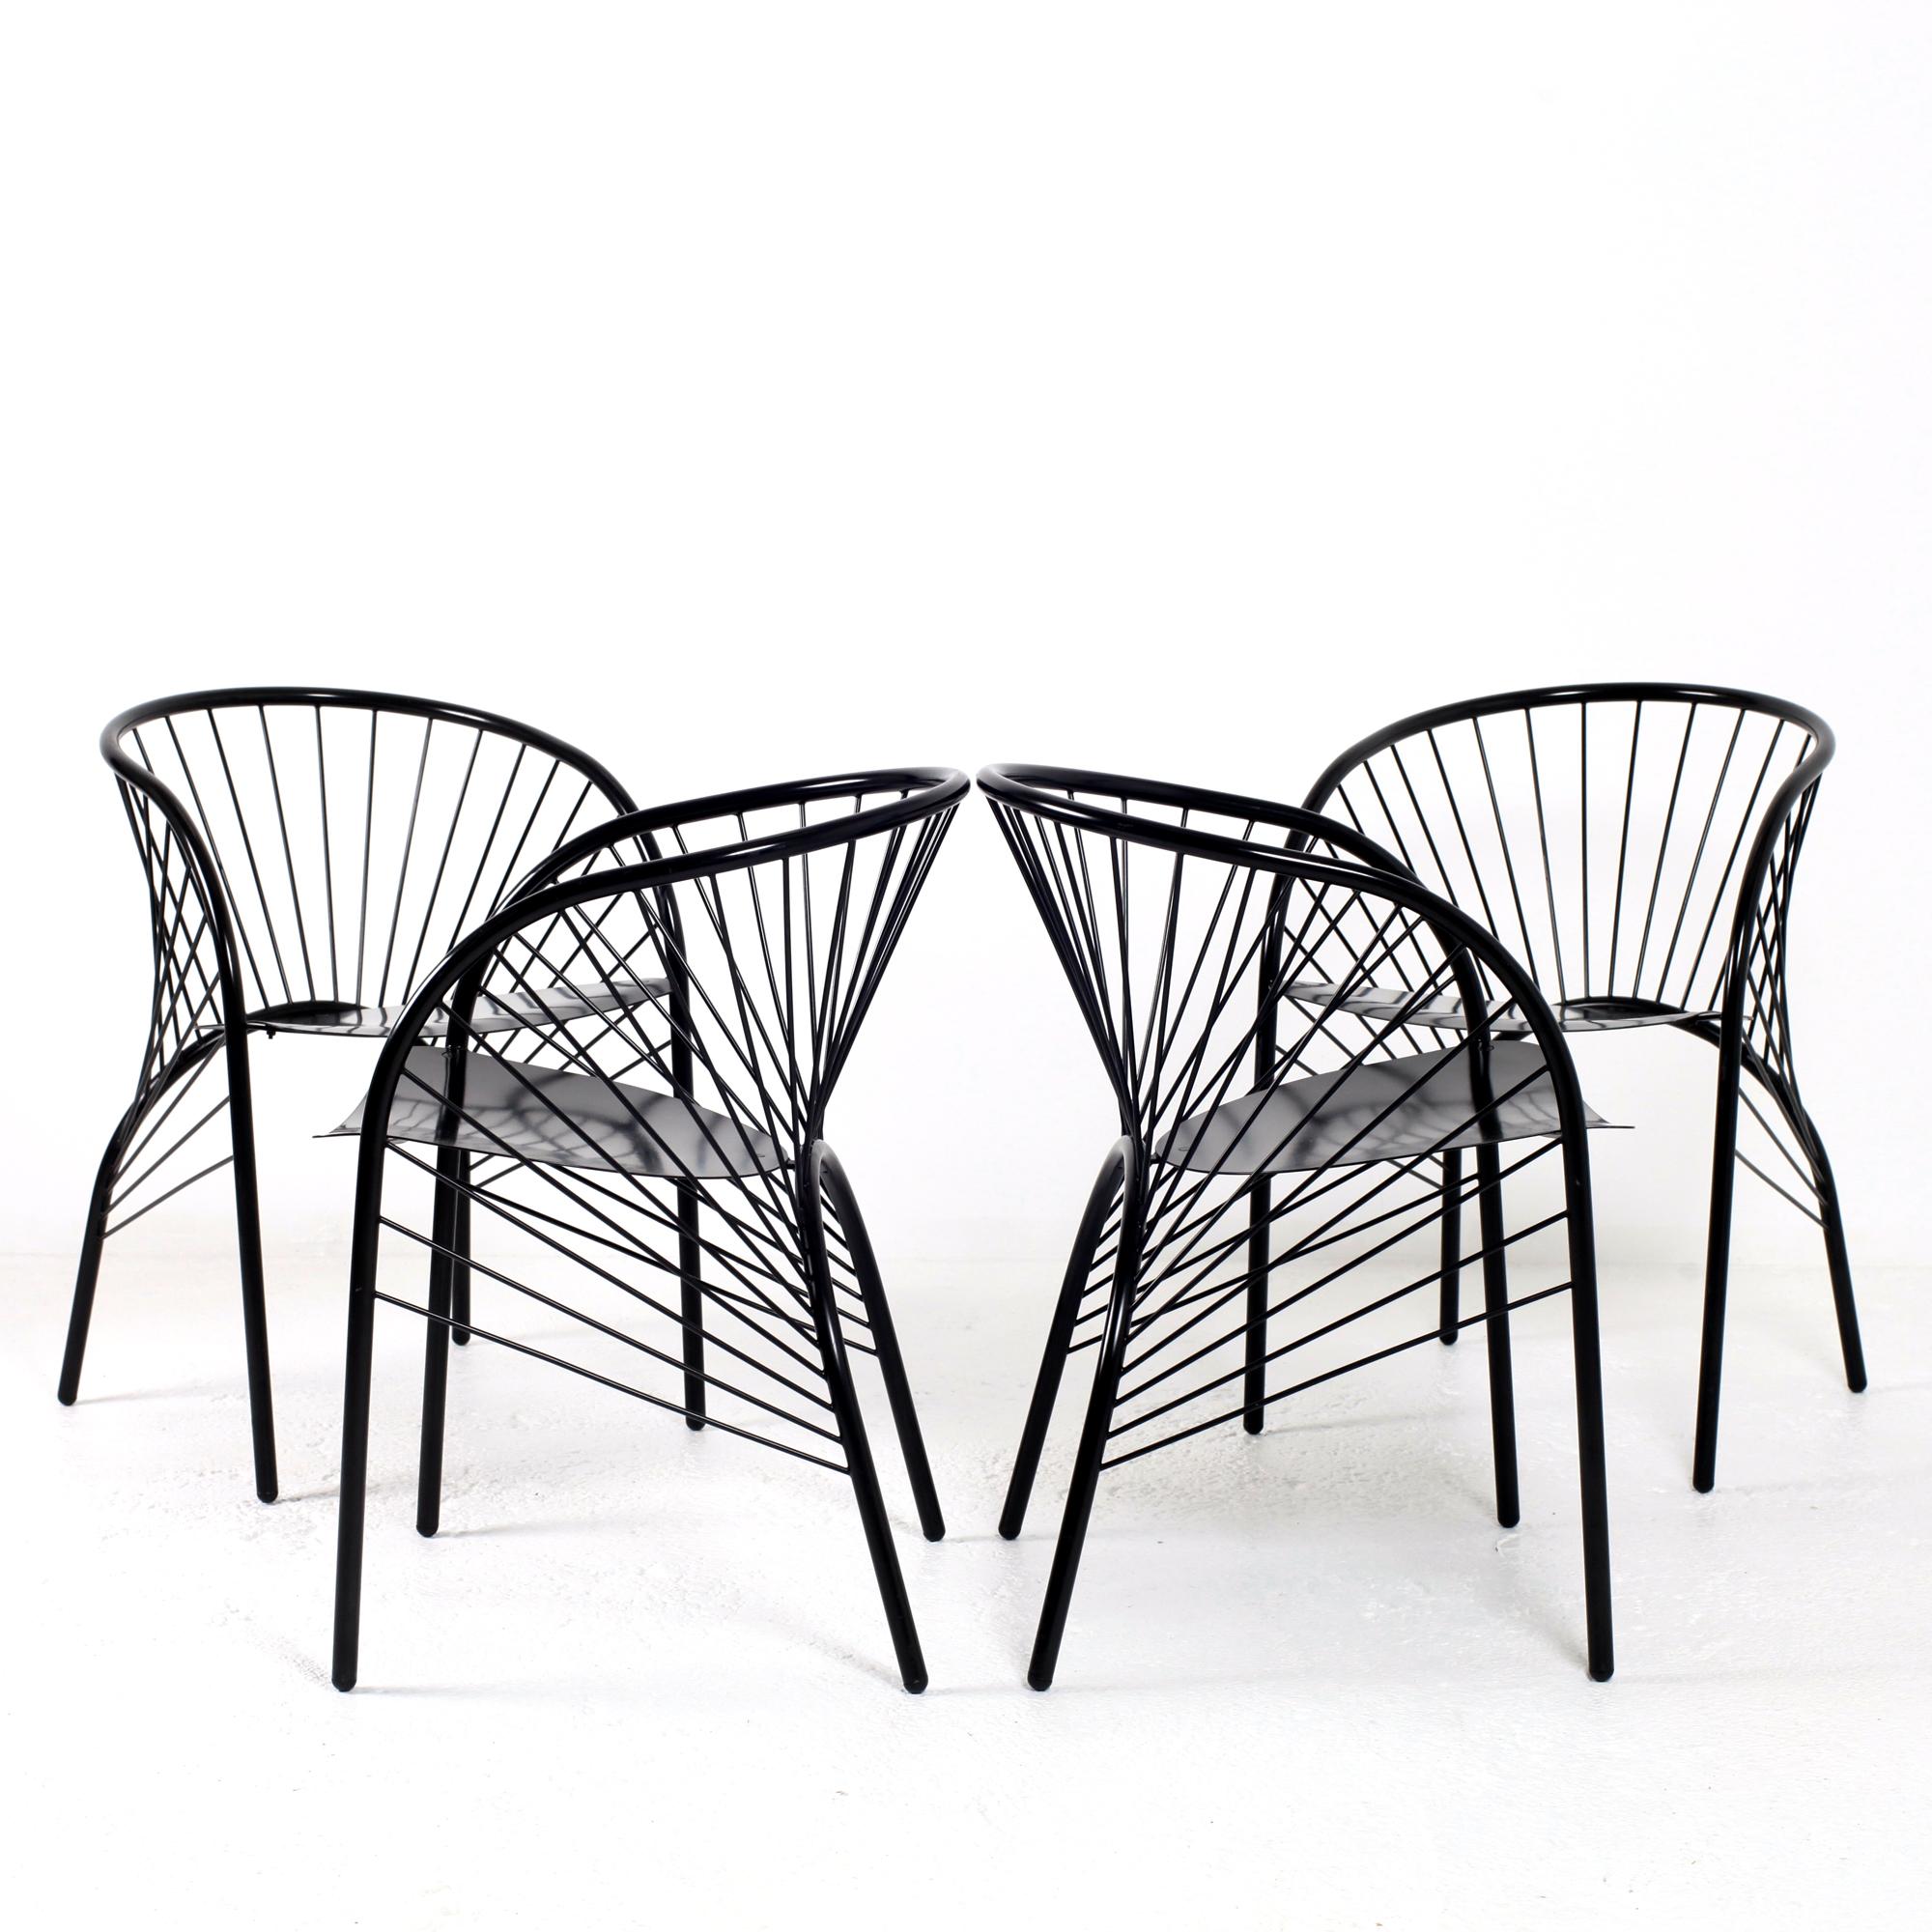 Post-Modern Set of Four Lizie Dining Chairs for Paolo Pallucco by Regis Protiere Italy 1984